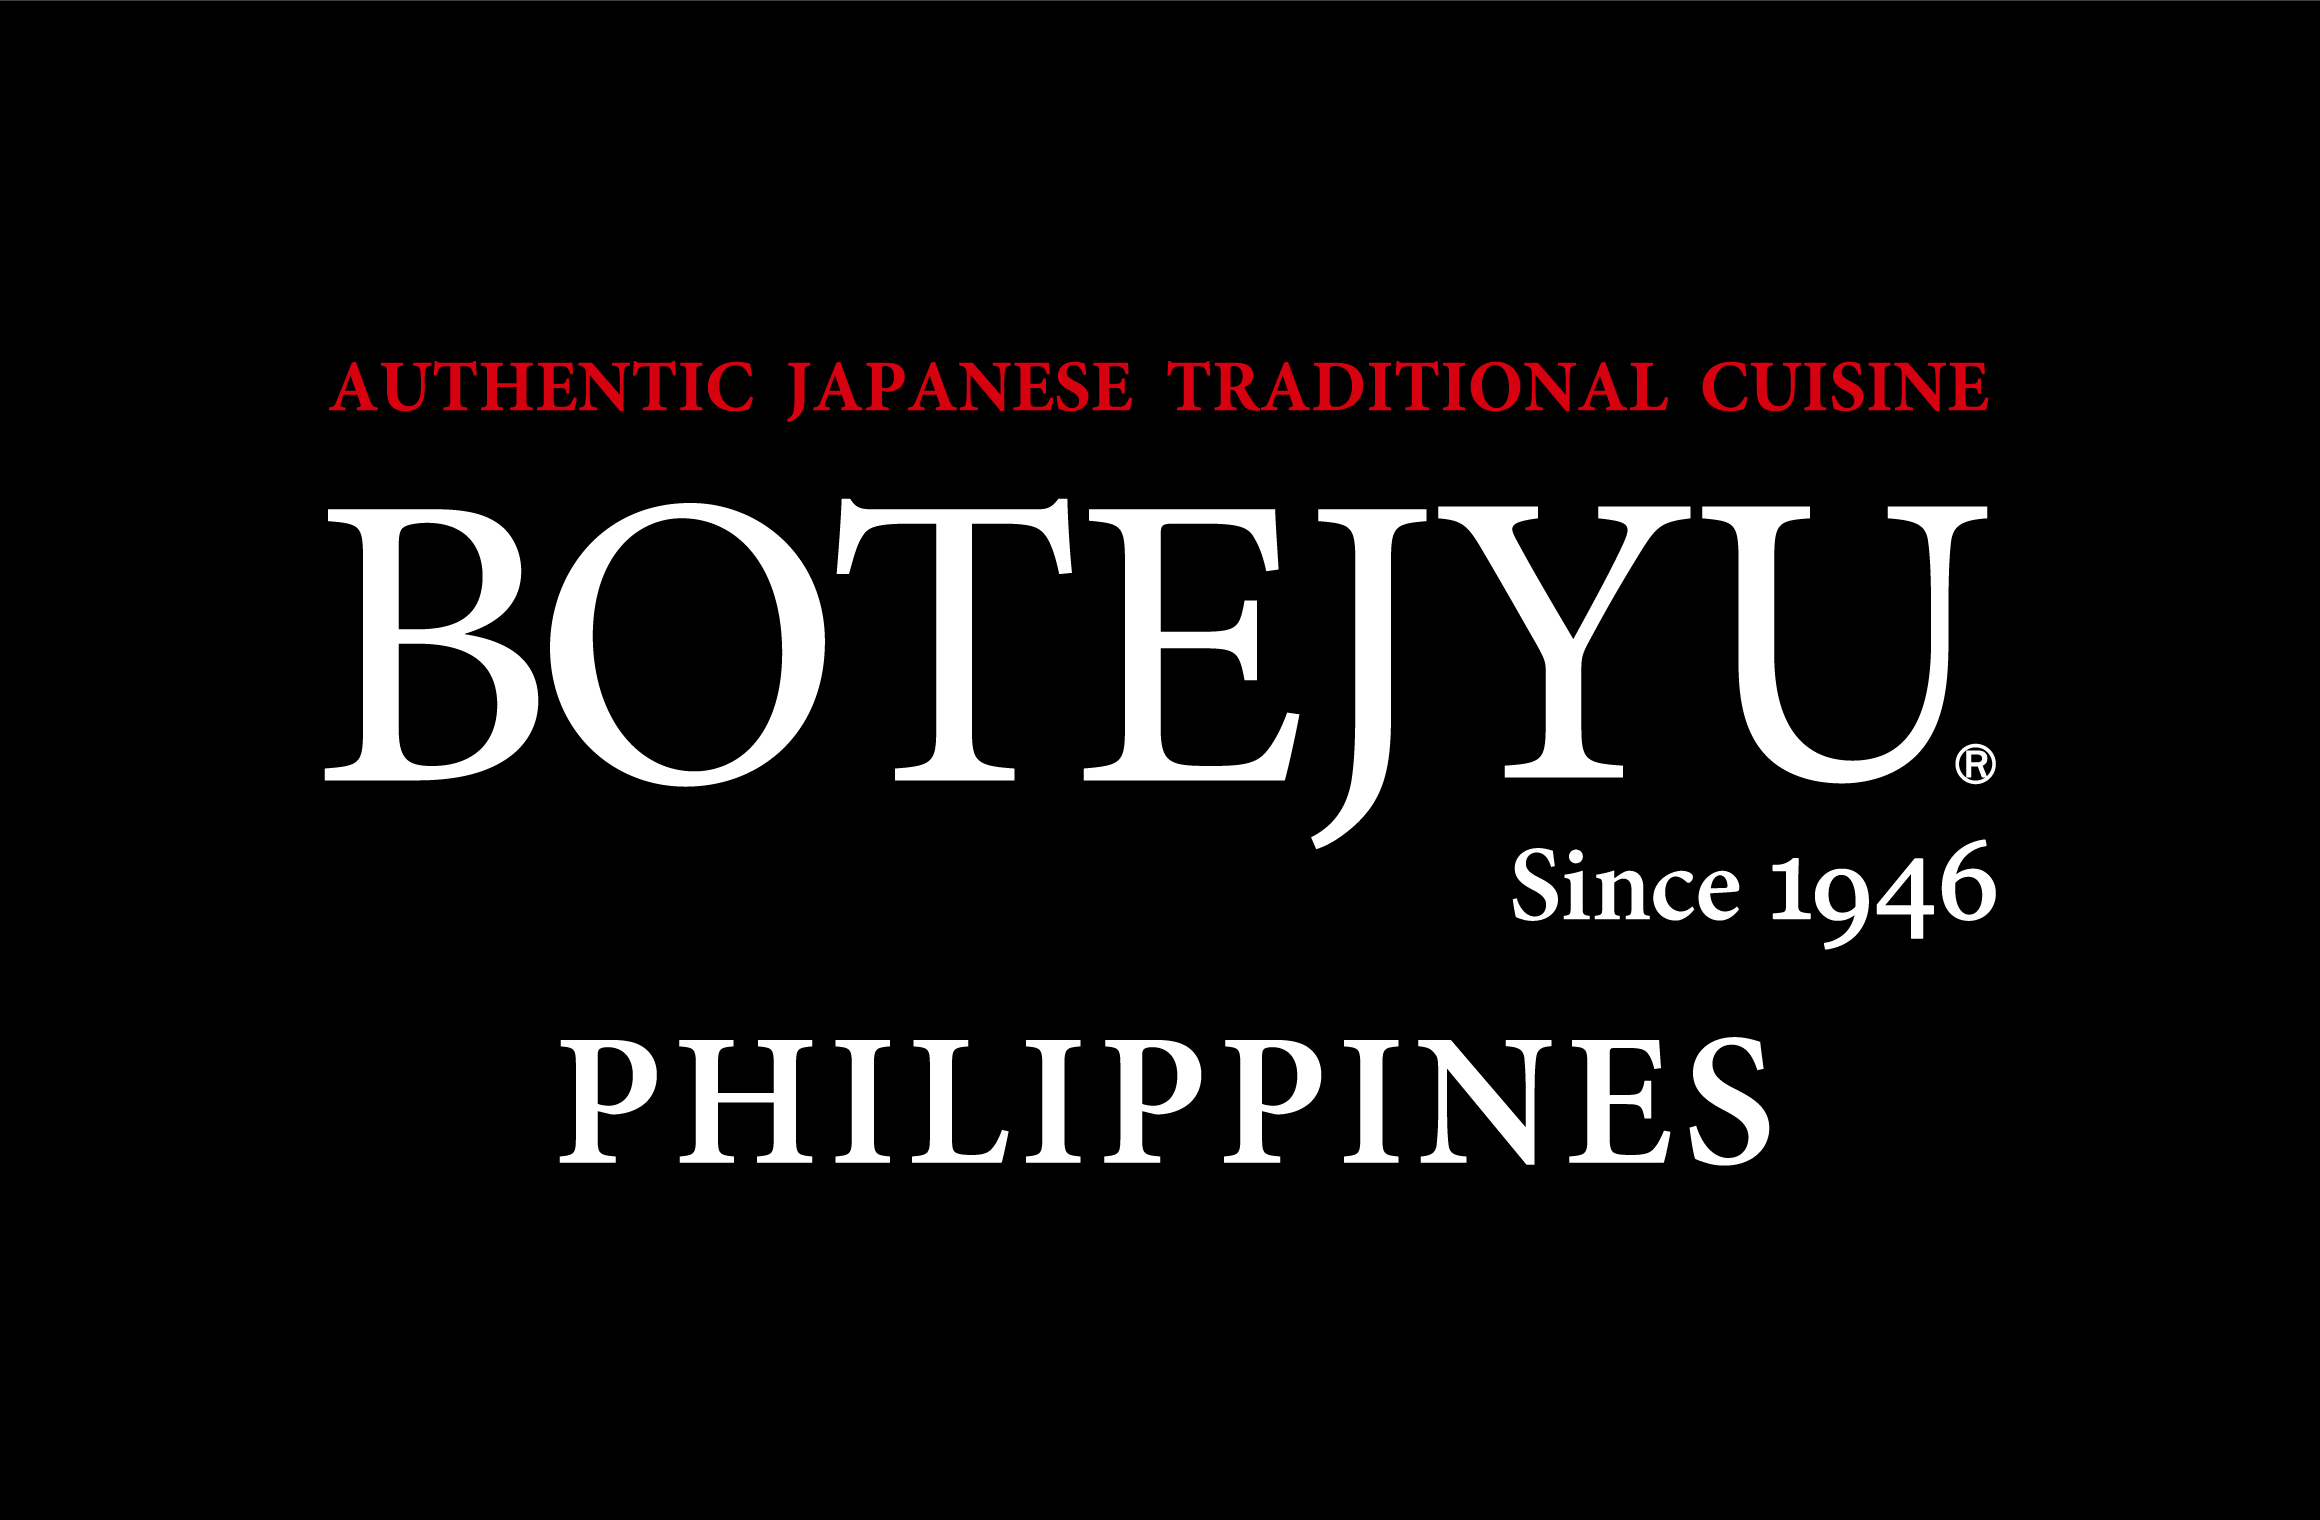 「BOTEJYU® Philippines 56 / Cubao Getway」: オープン致します。